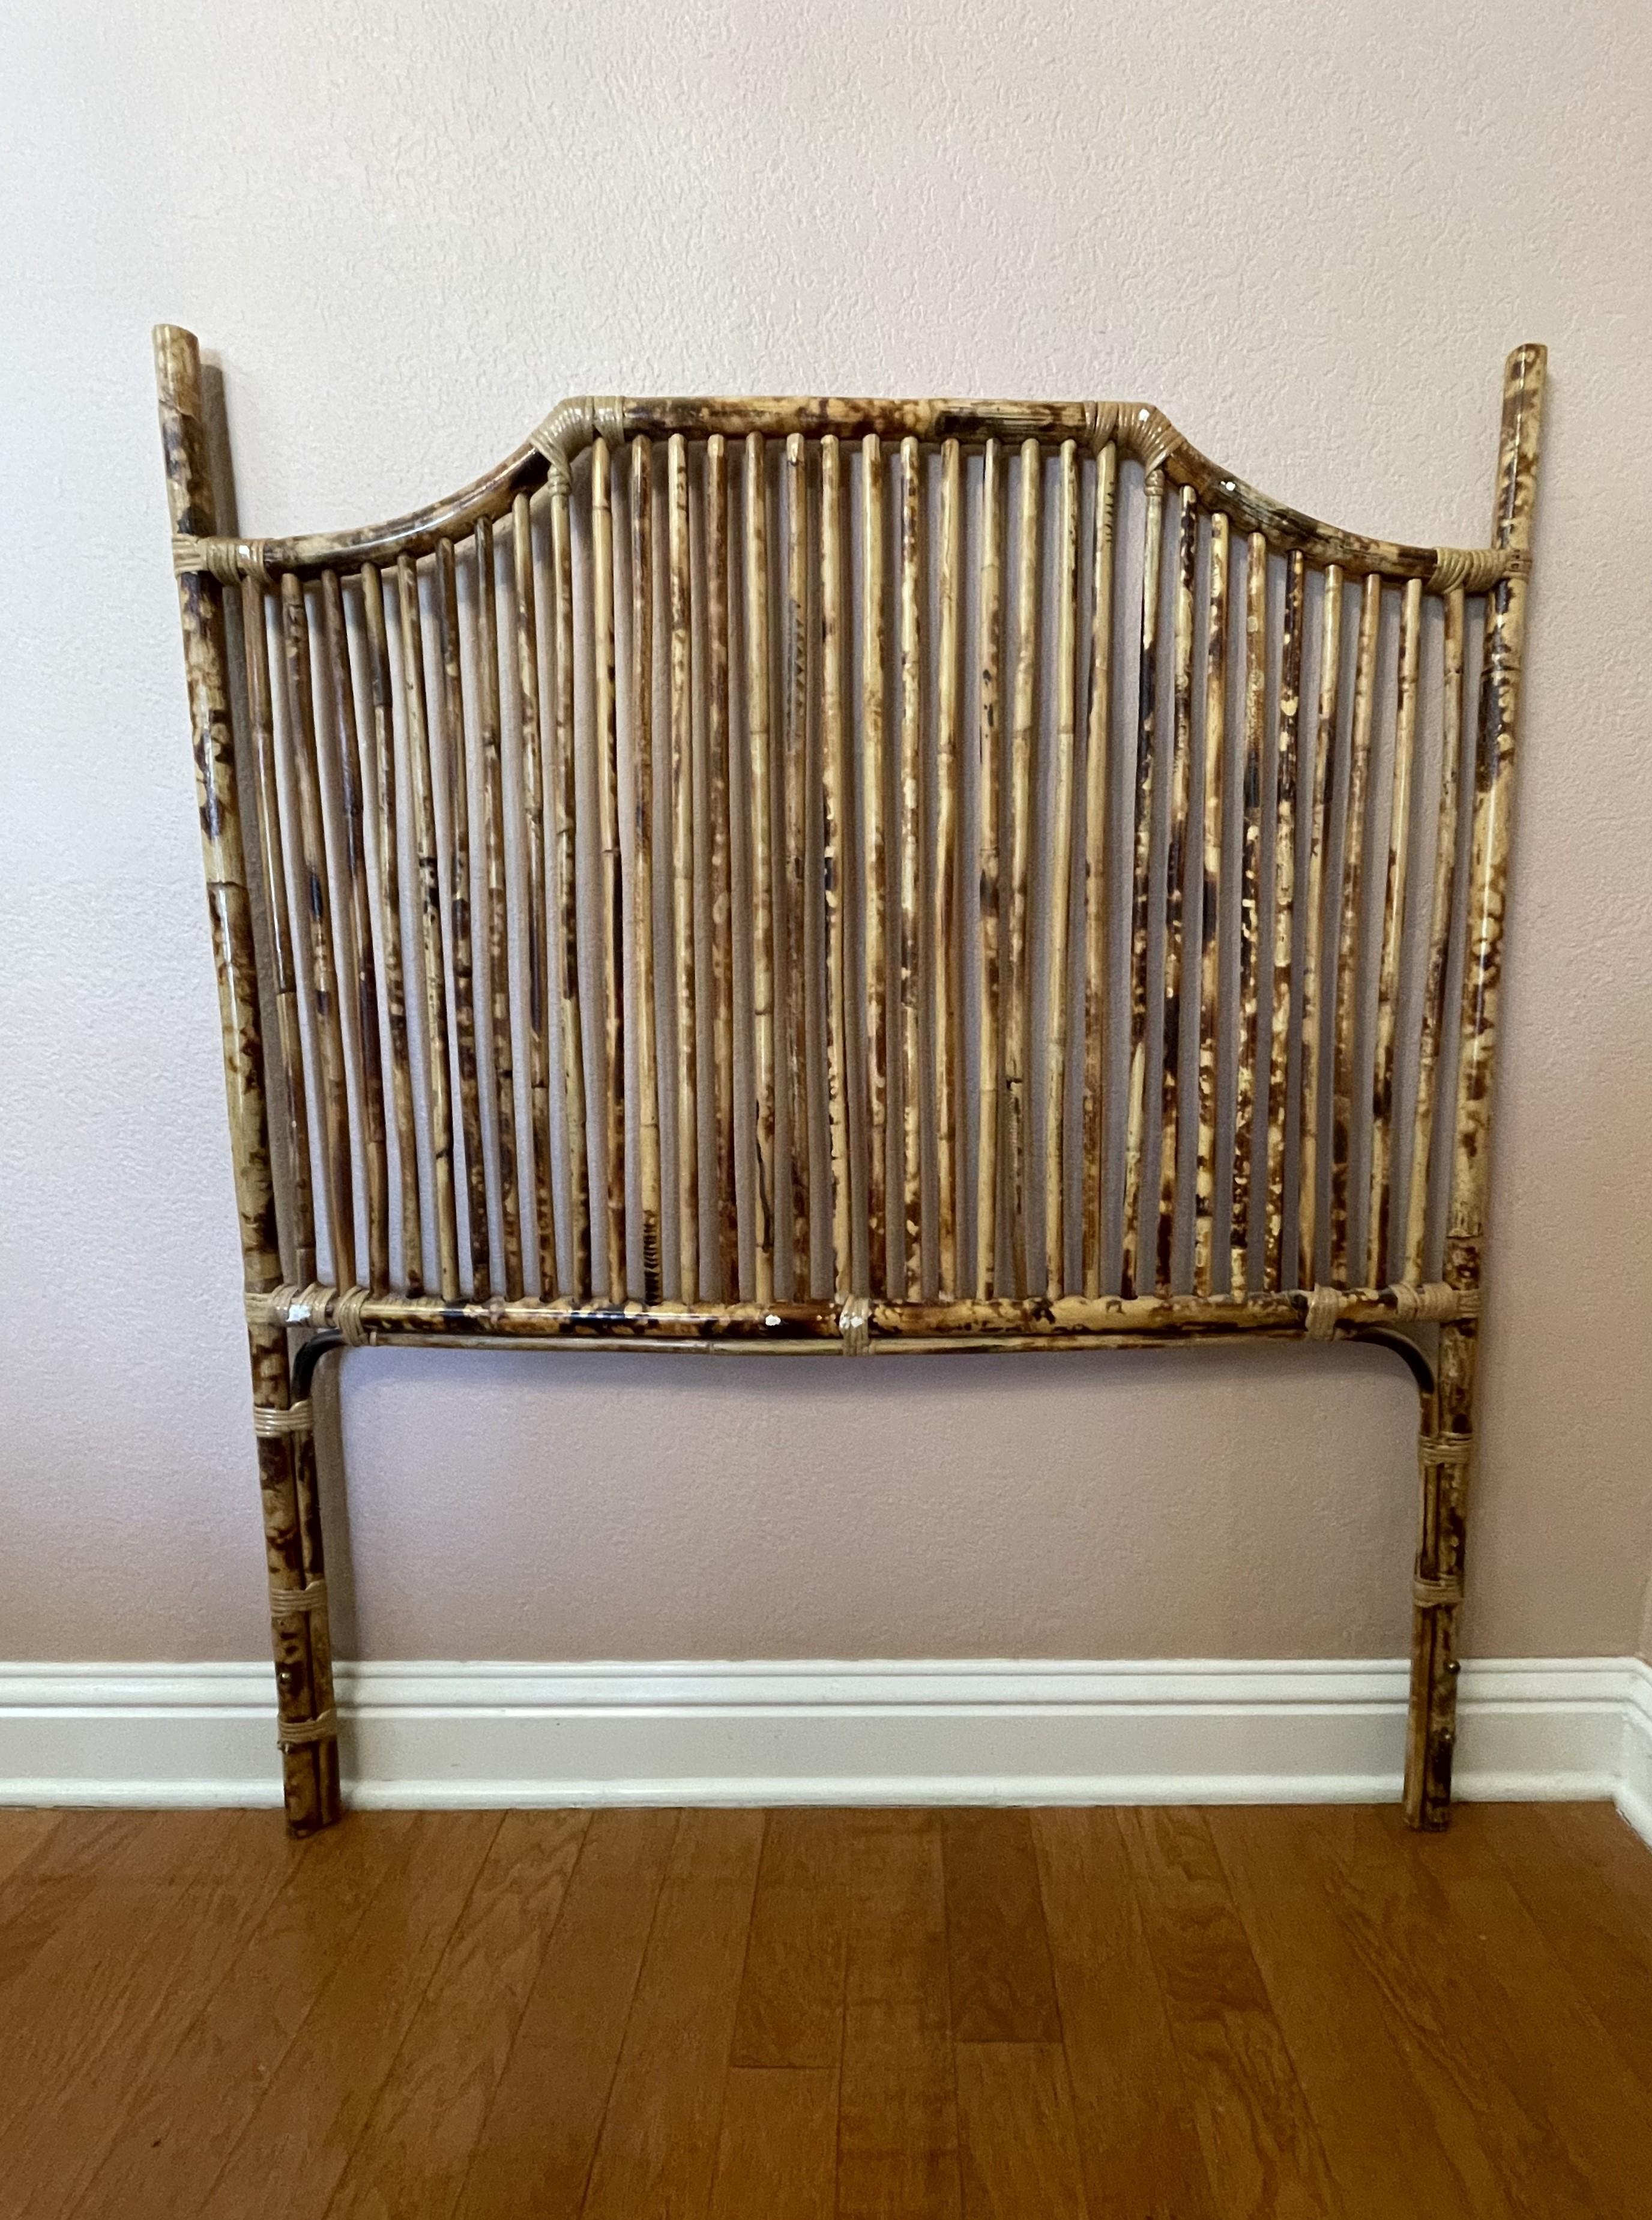 Campaign Mid-20th Century Tortoise-Bamboo and Rattan Headboards -- A Pair For Sale